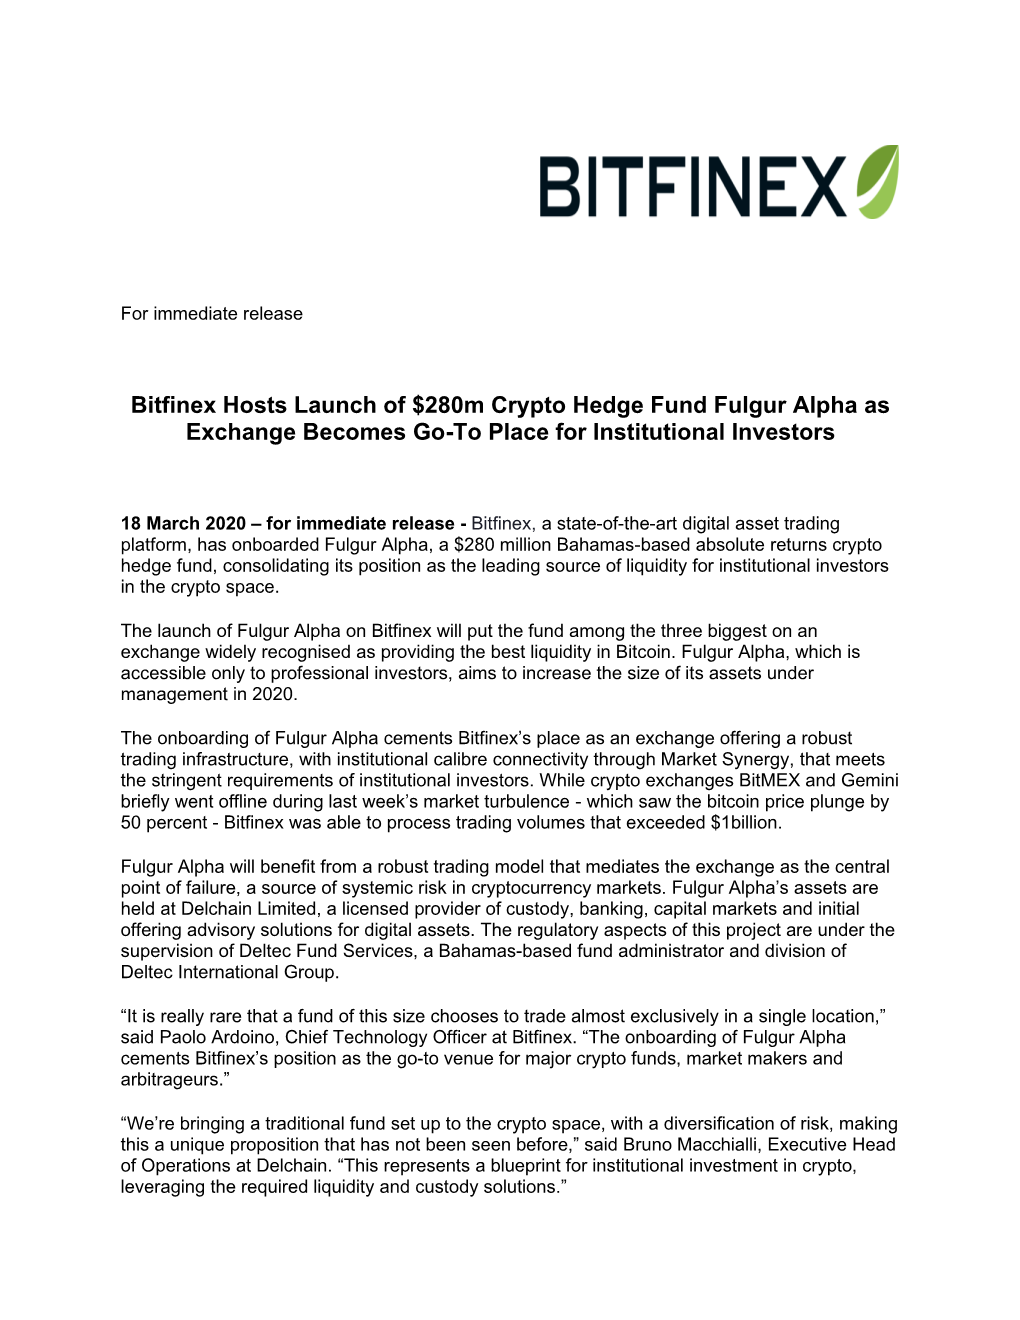 Bitfinex Hosts Launch of $280M Crypto Hedge Fund Fulgur Alpha As Exchange Becomes Go-To Place for Institutional Investors